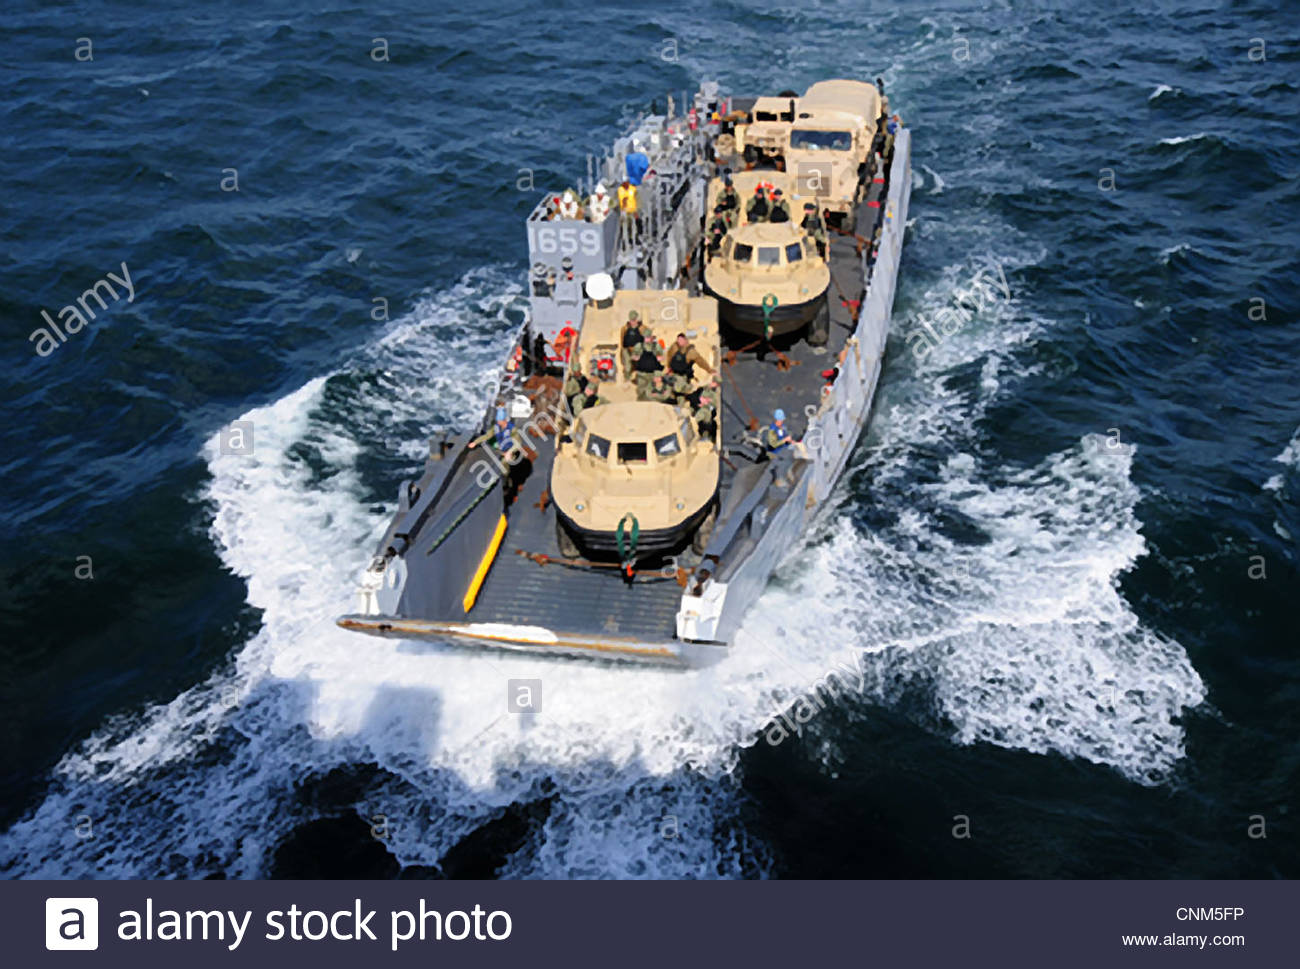 .com%2Fcomp%2FCNM5FP%2Fa-us-navy-landing-craft-approaches-the-well-deck-of-the-amphibious-CNM5FP.jpg